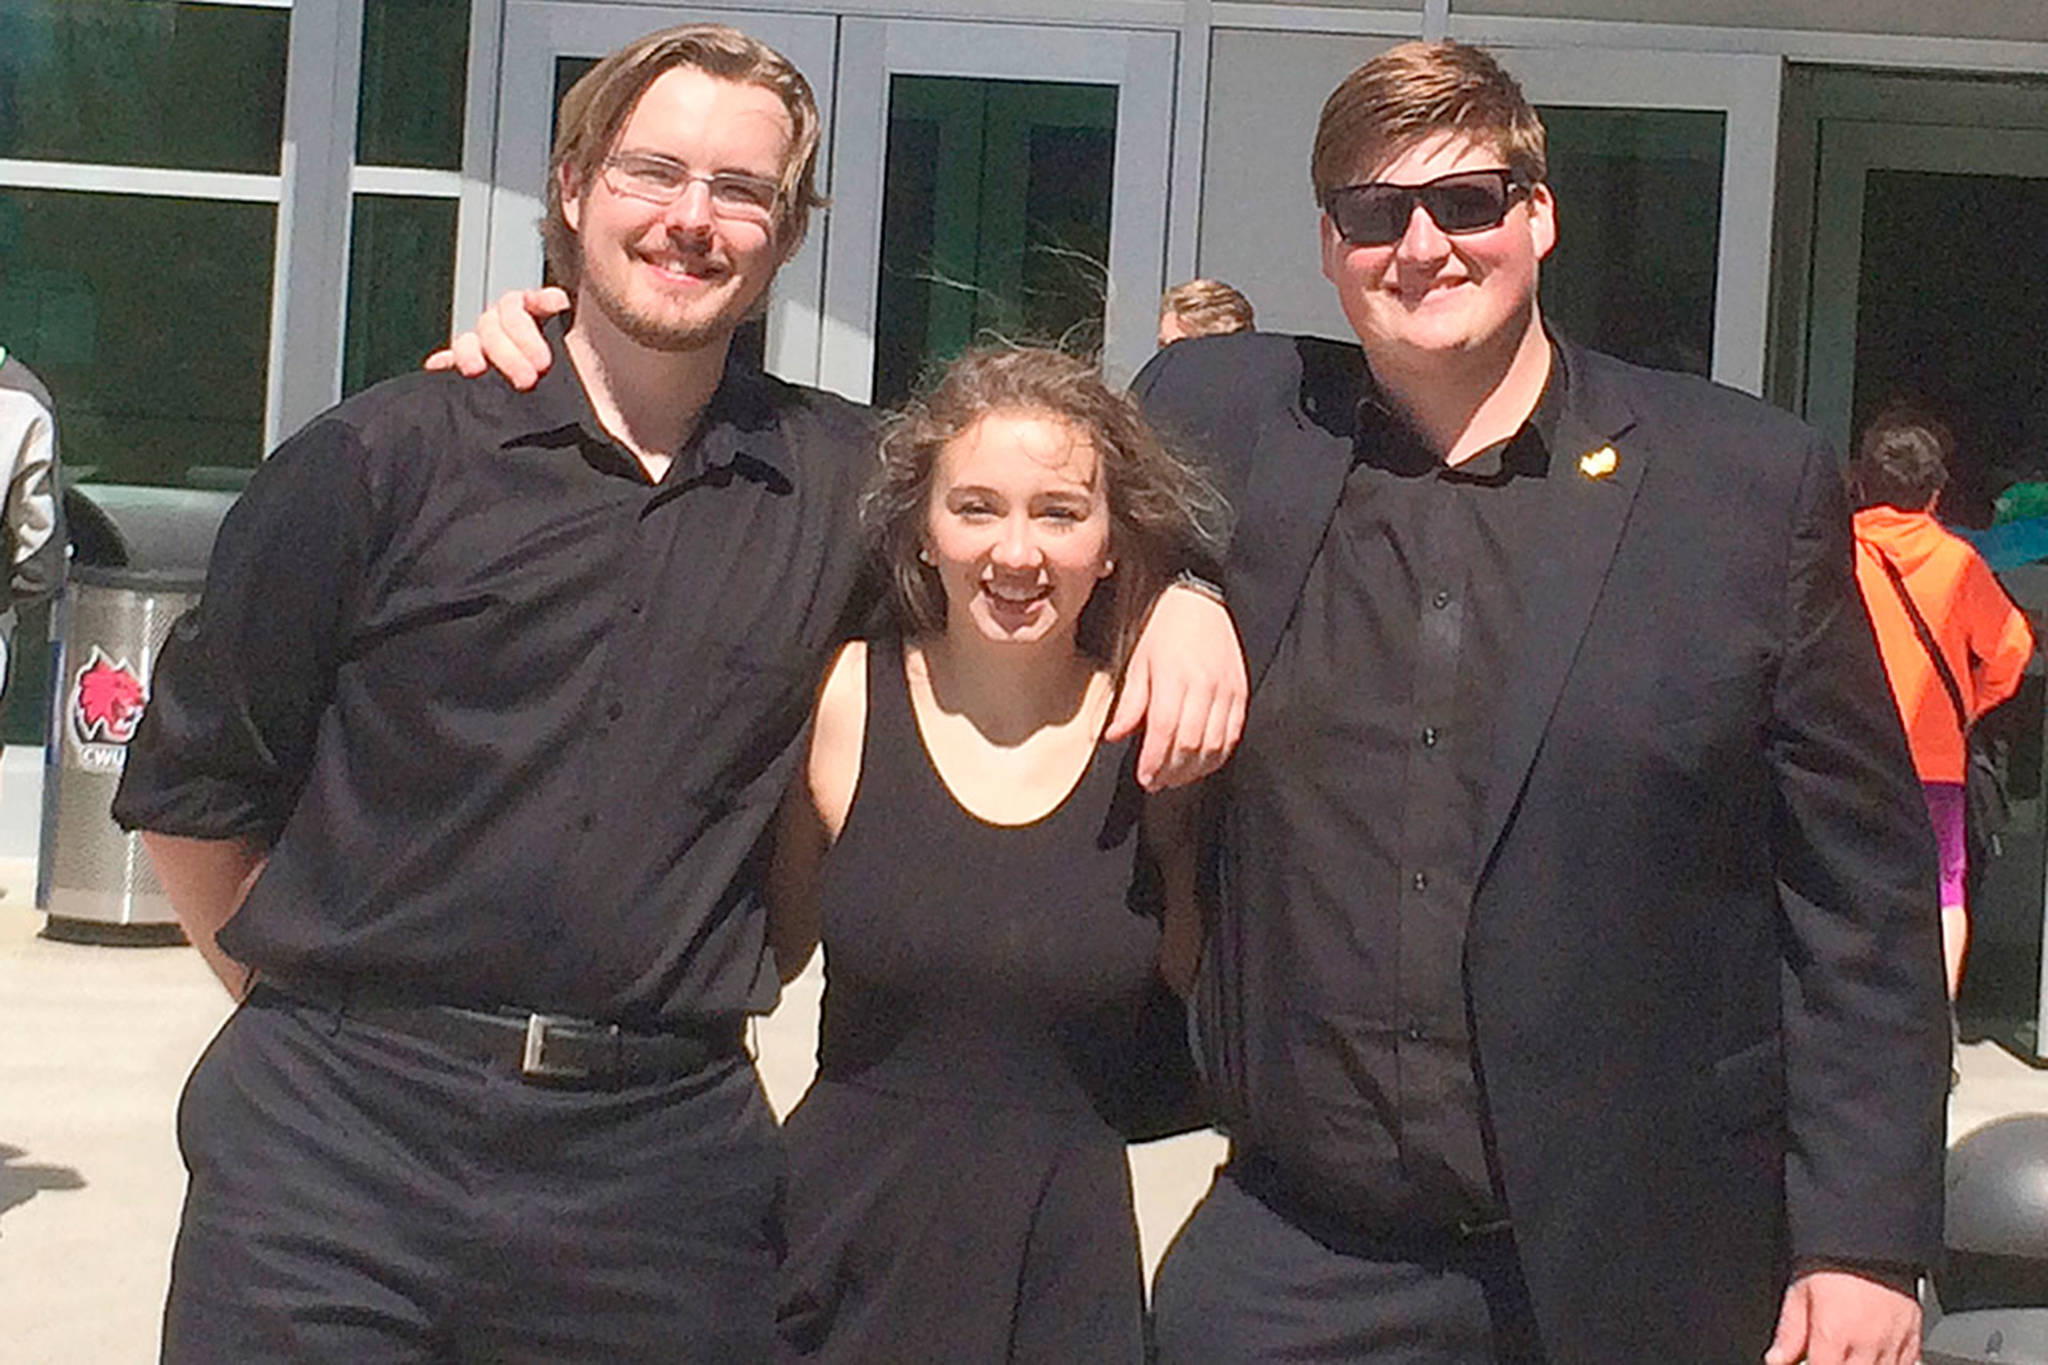 South Whidbey High School band students win event